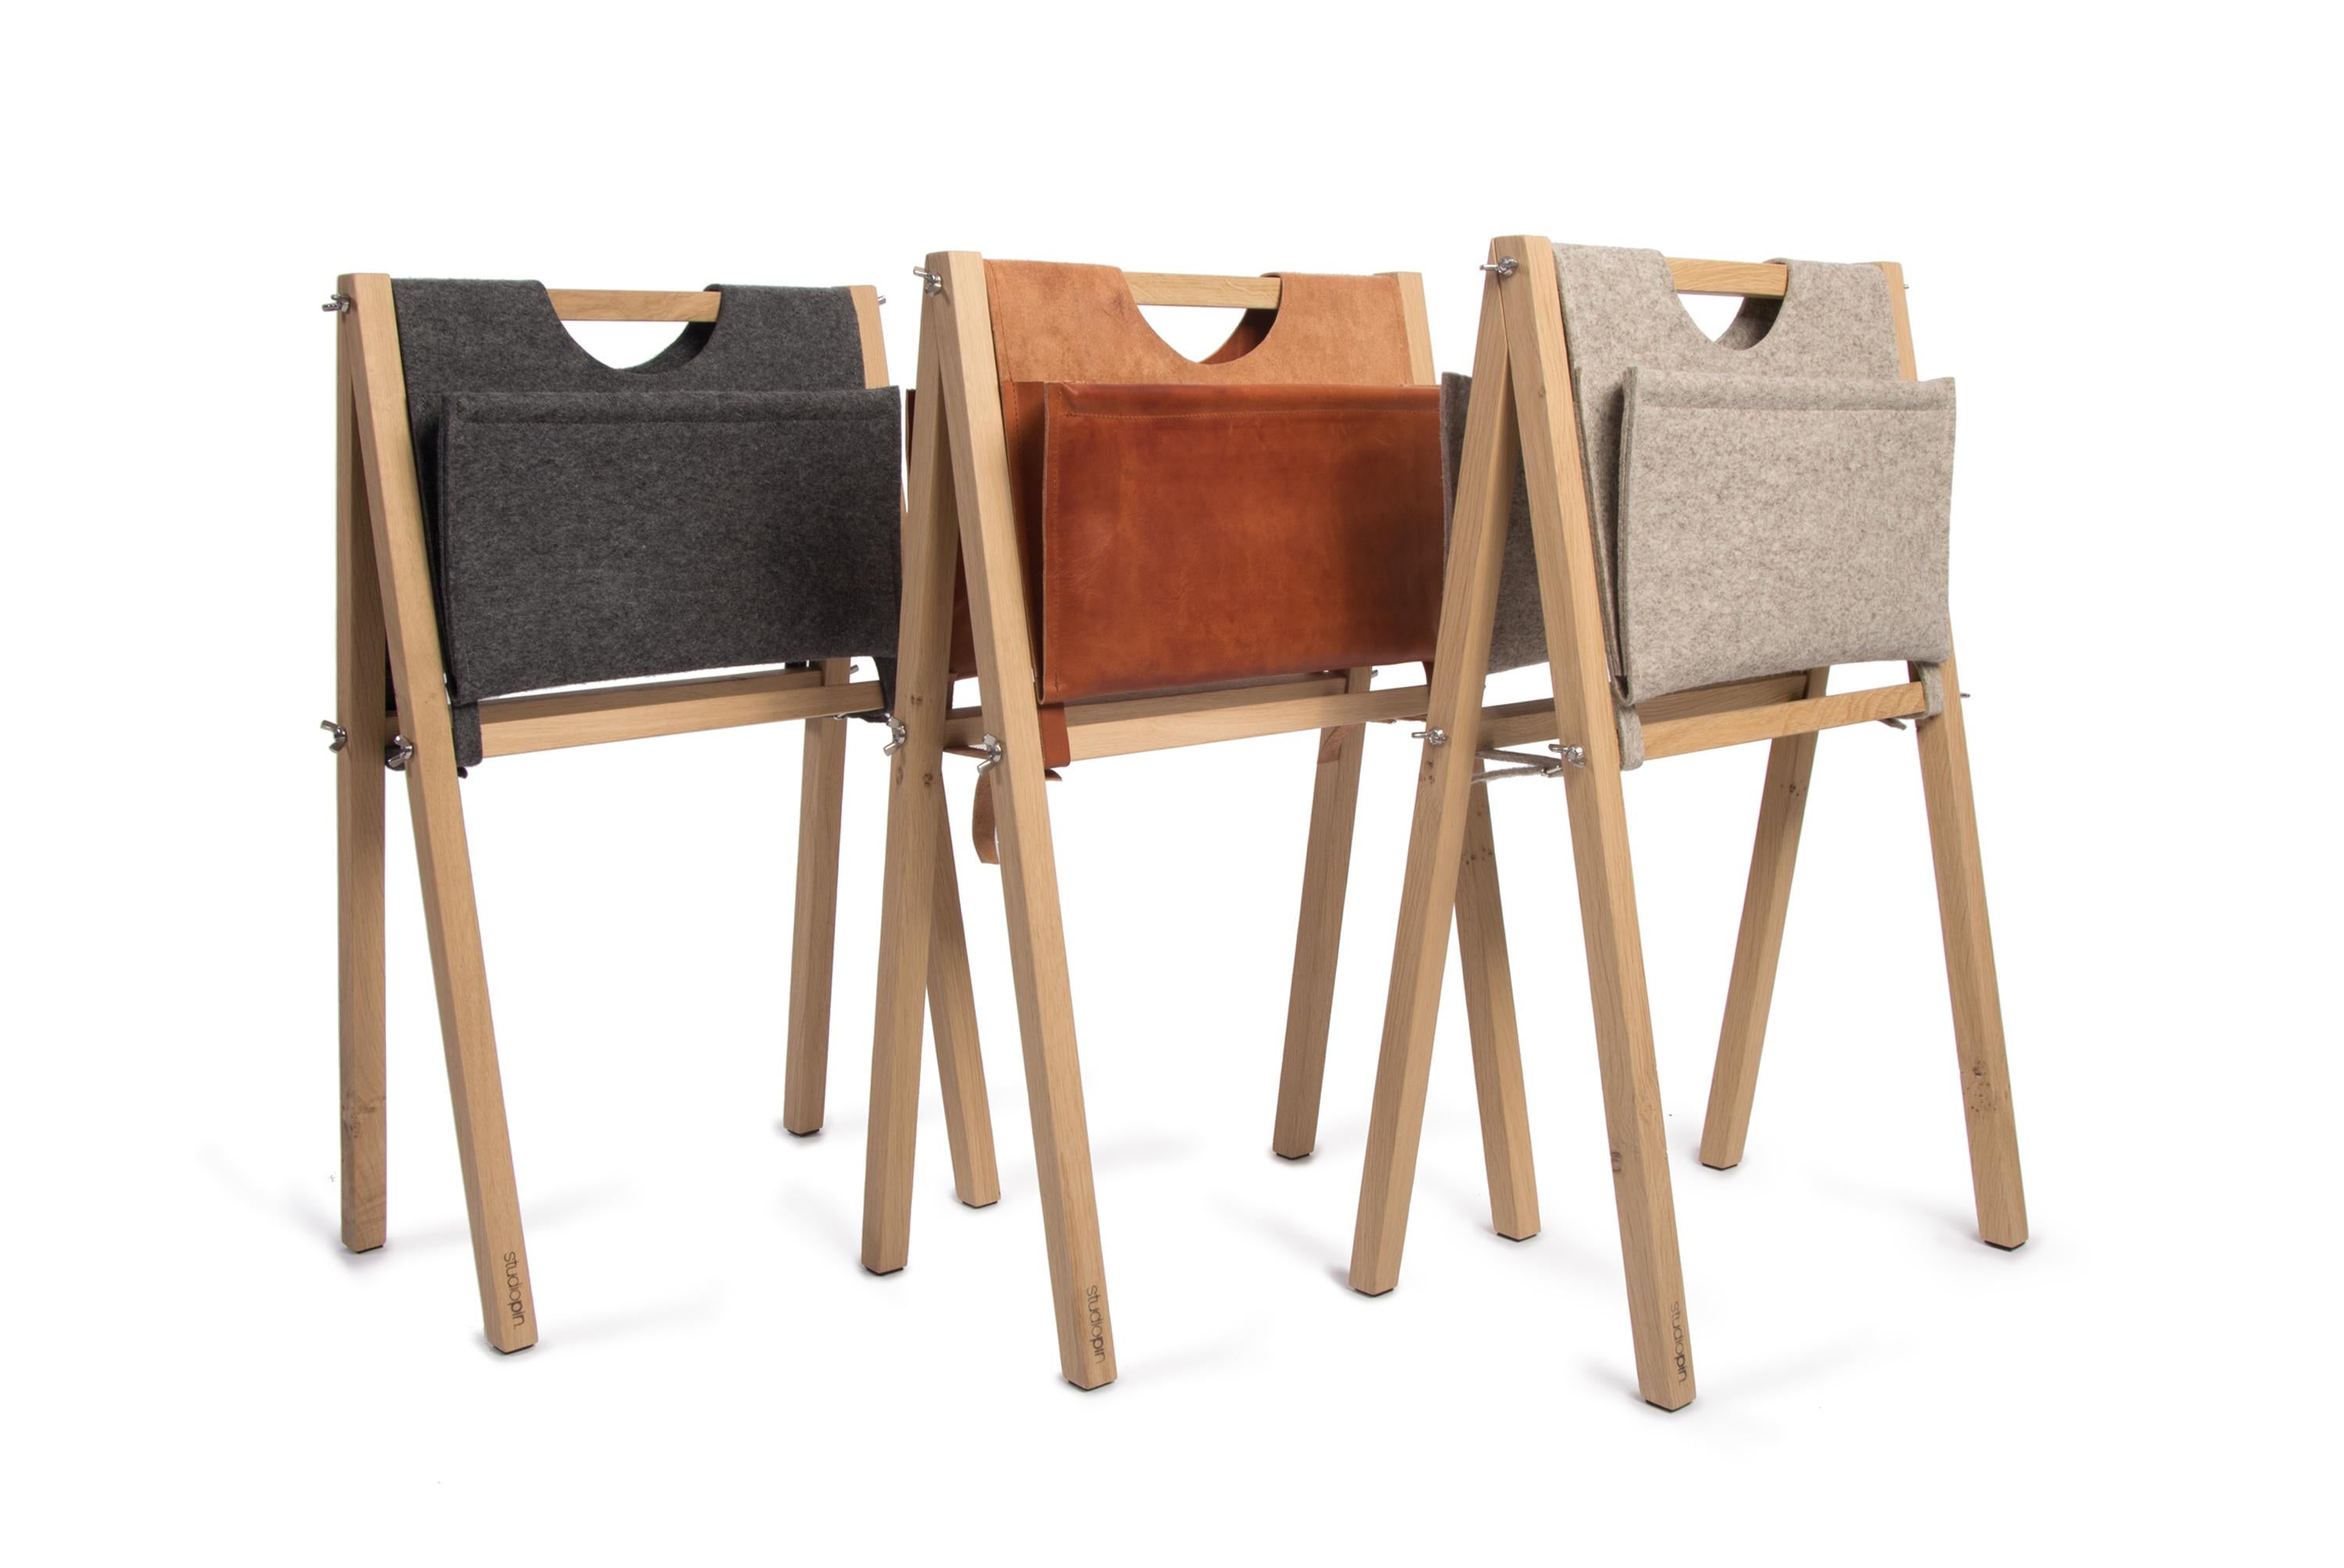 Light brown Stan magazine rack by Studio Pin
Dimensions: W 42 x D 26 x H 67.2 cm
Materials: oak, wool felt.
Weight: 2.15 Kg.

Stan is a magazine rack. The oak frame perfectly matches the 3 types of bags in the colors light brown and dark grey